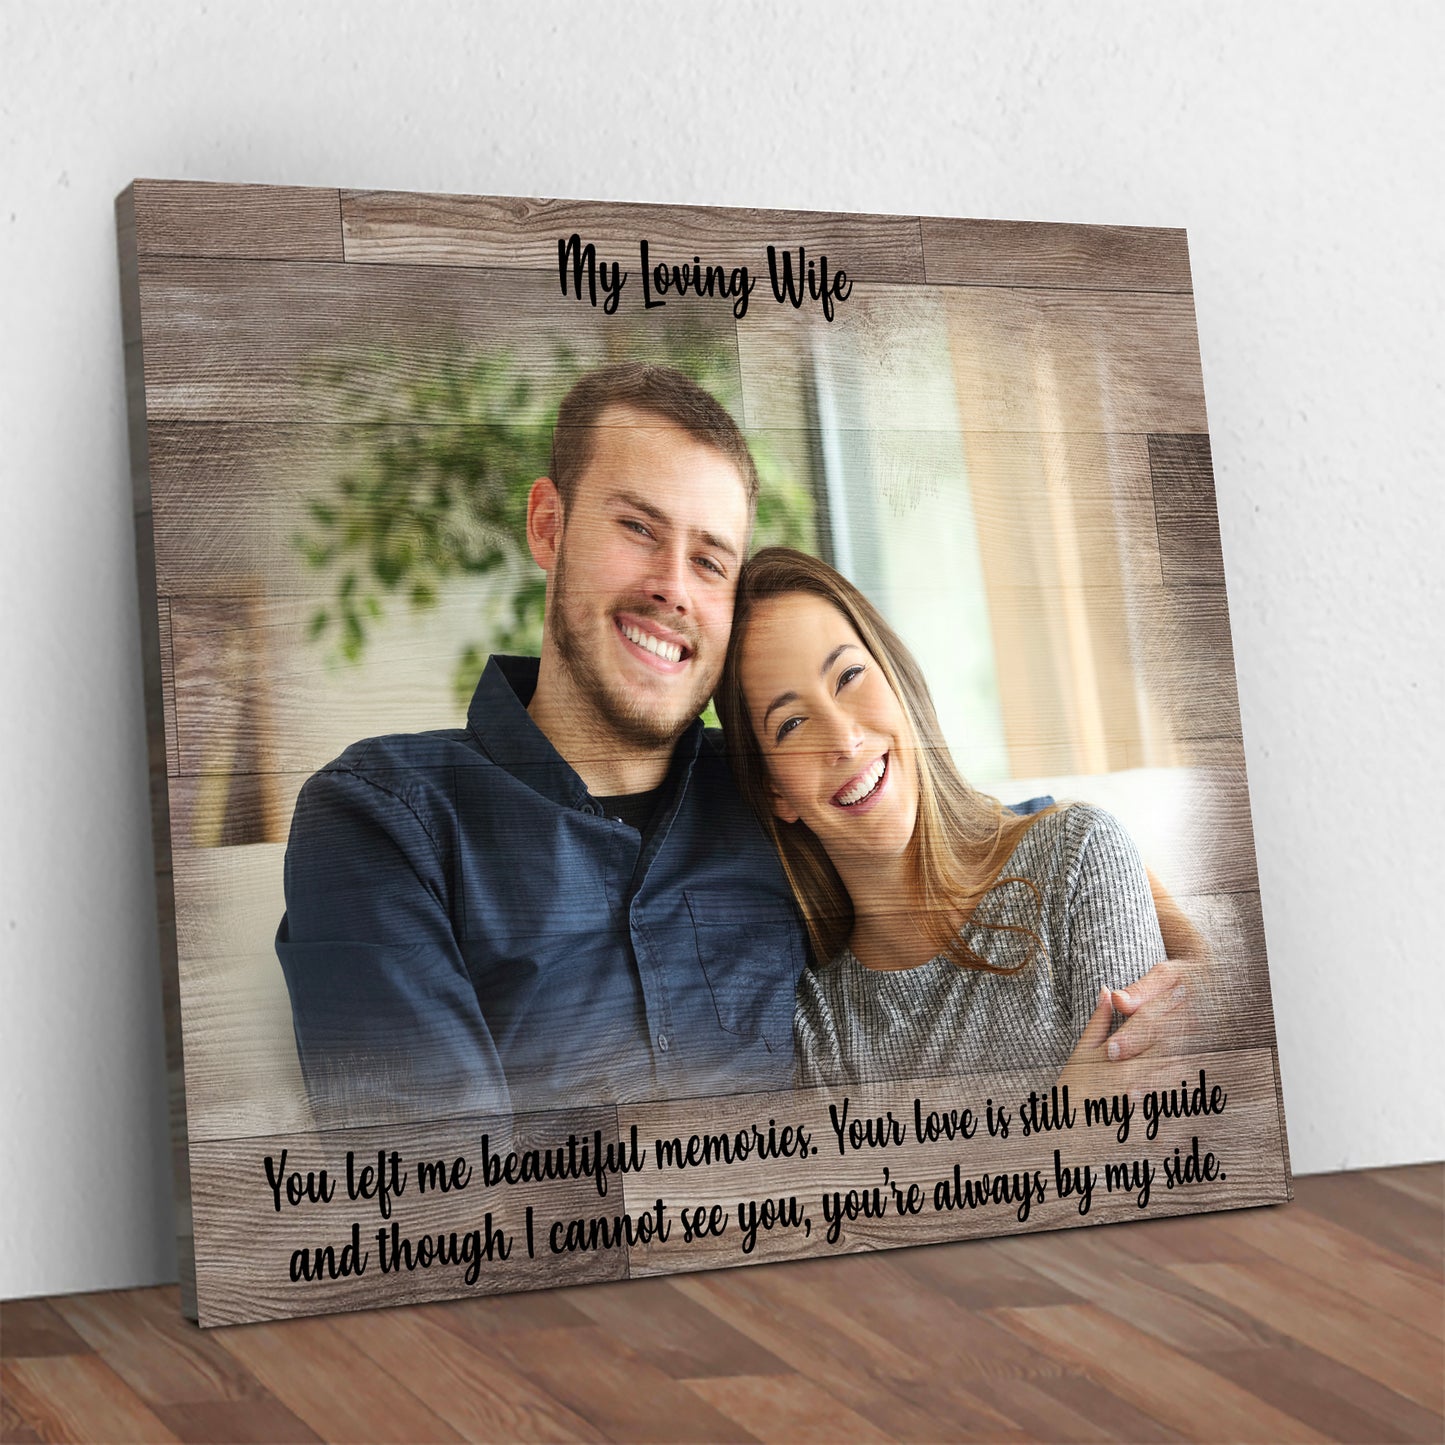 Couple Memorial Sign - Image by Tailored Canvases